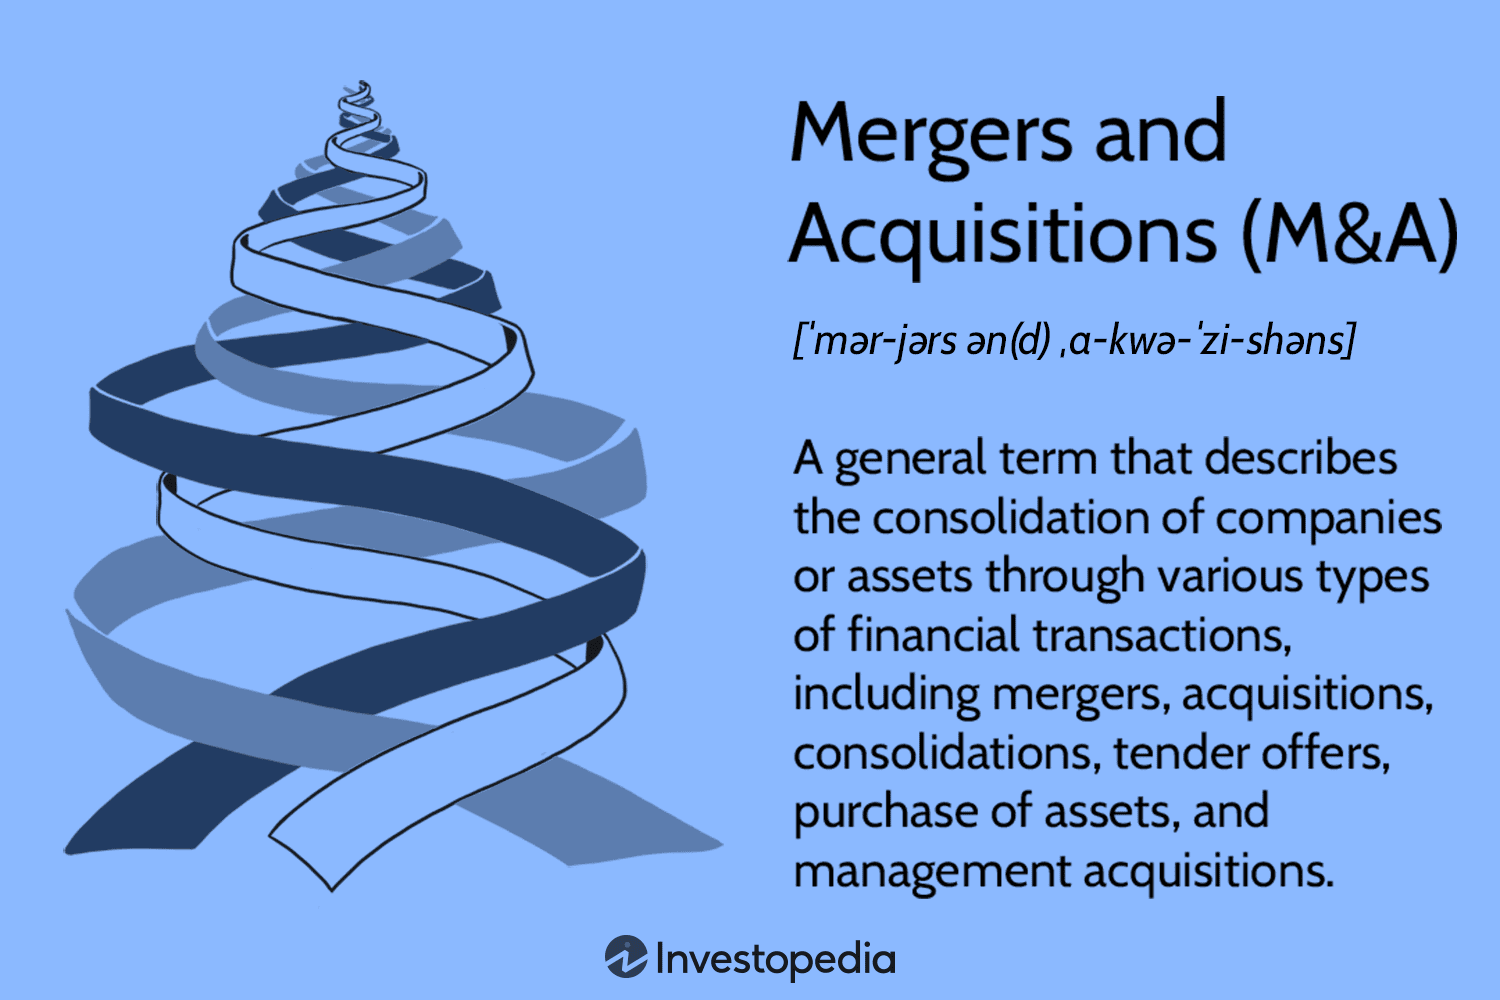 Mergers and Acquisitions (M&A): Types, Structures, Valuations [Video]